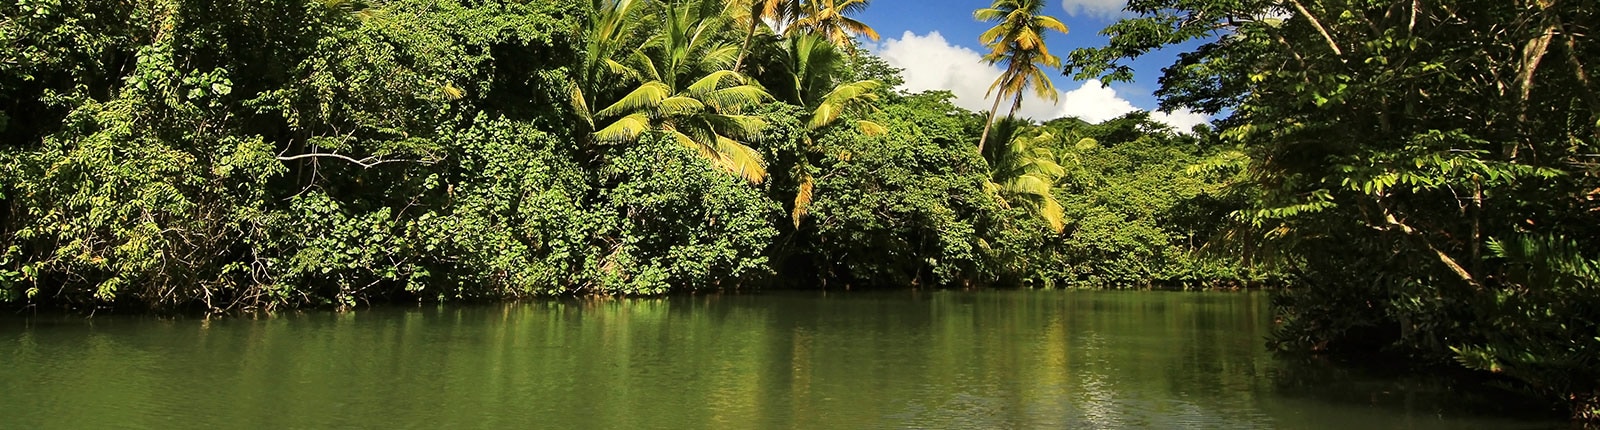 Floating in the river enjoying the foliage in Dominica